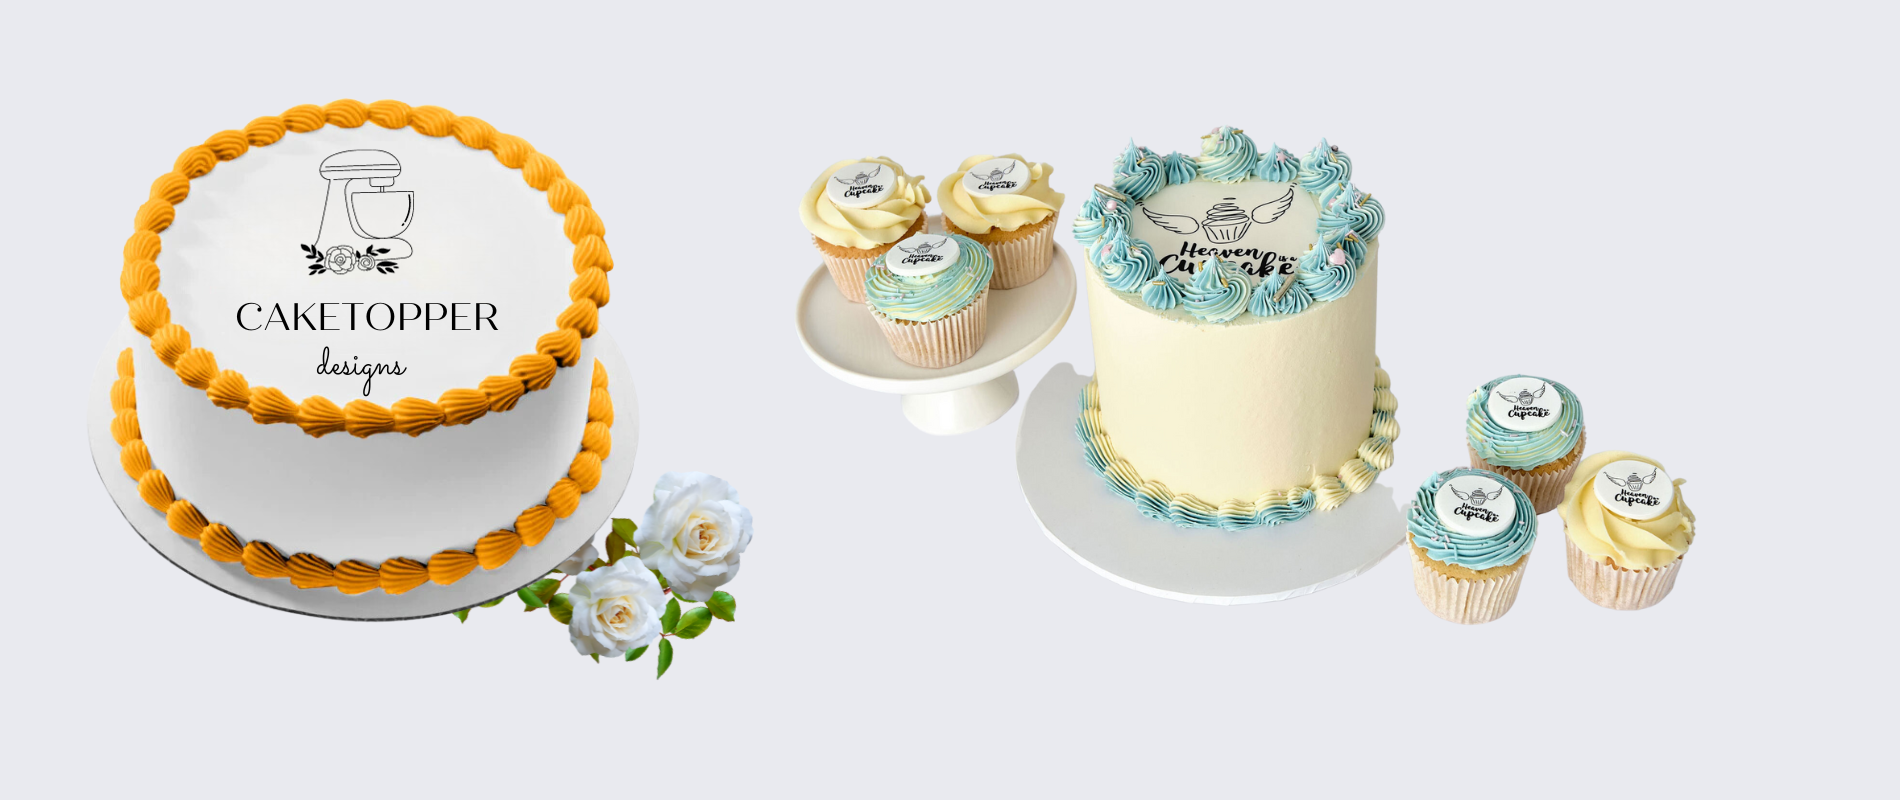 Edible birthday cake Toppers FromCaketopper Designs